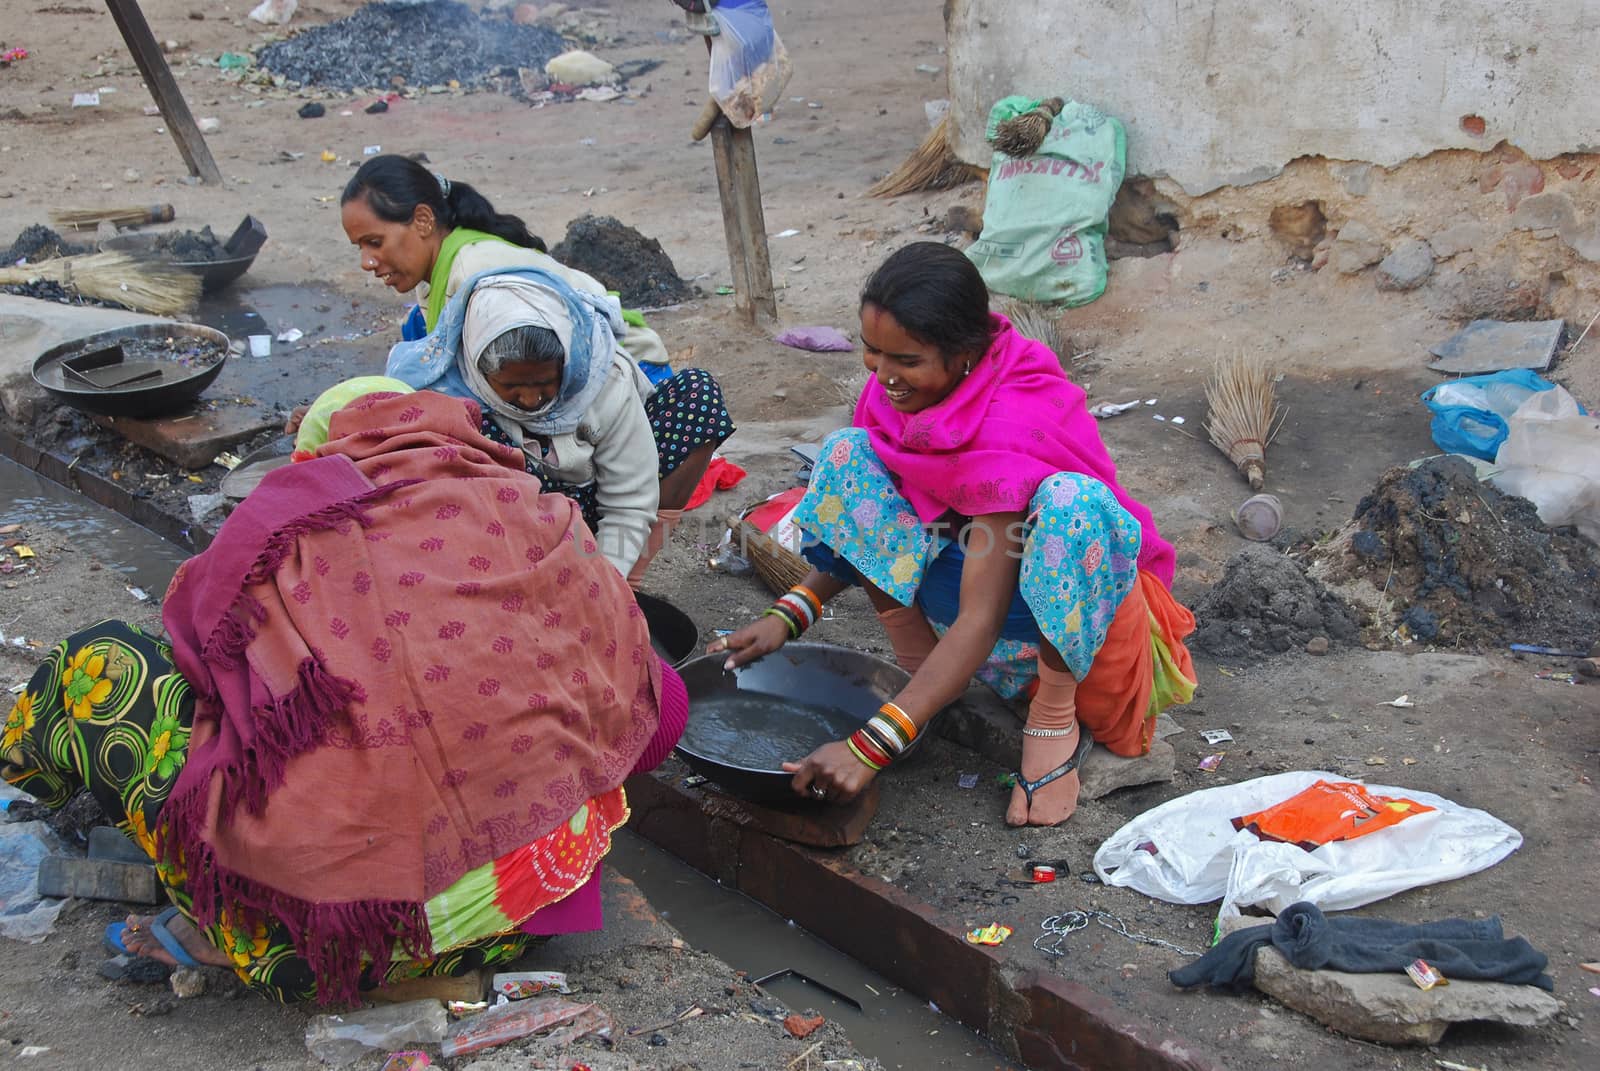 Women working on a street in Bikaner, India
29 Dec 2008
No model release
Editorial only